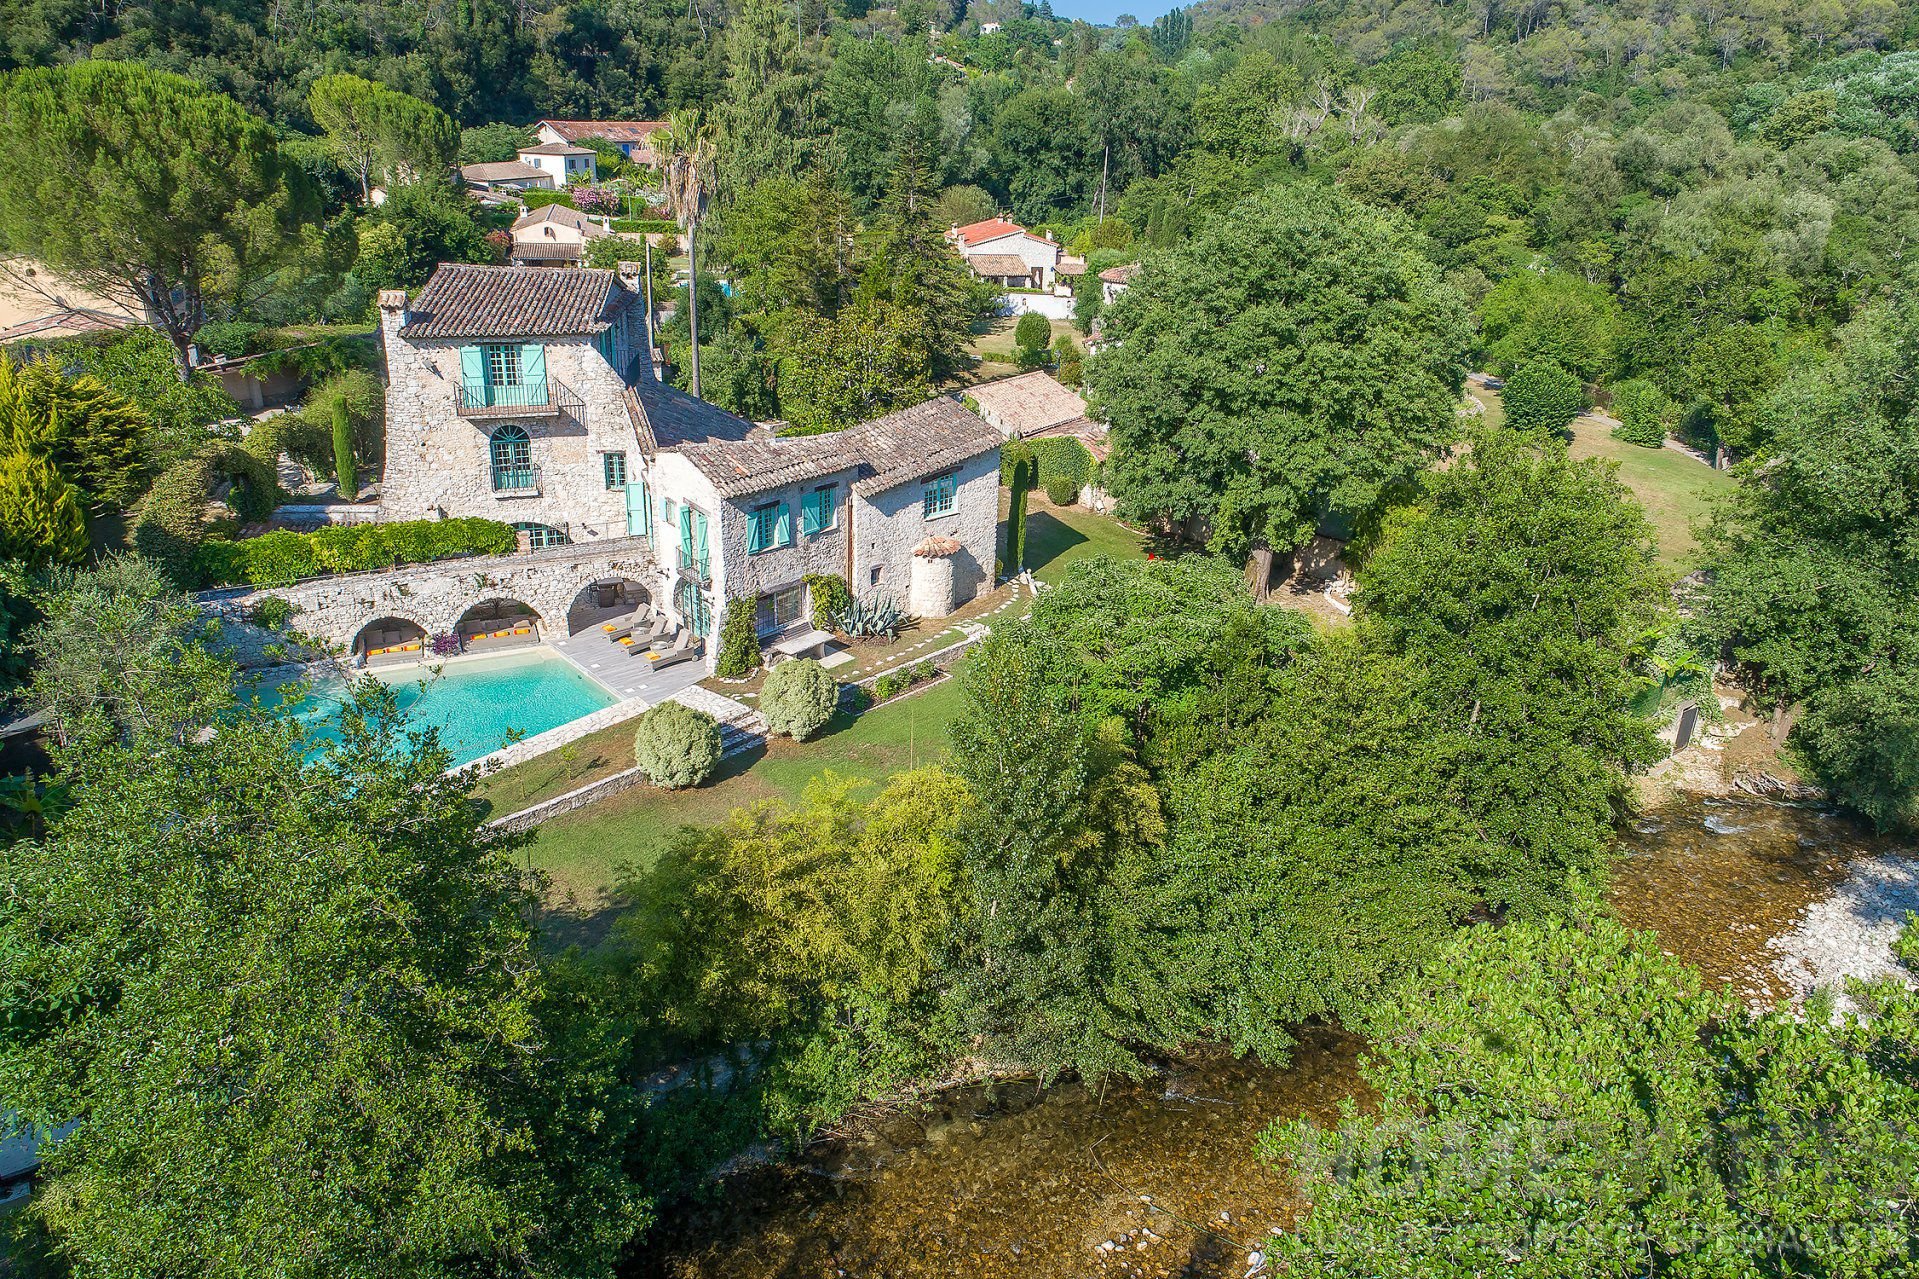 Beautiful, former watermill in a wonderful riverside location on the Cote d’Azur